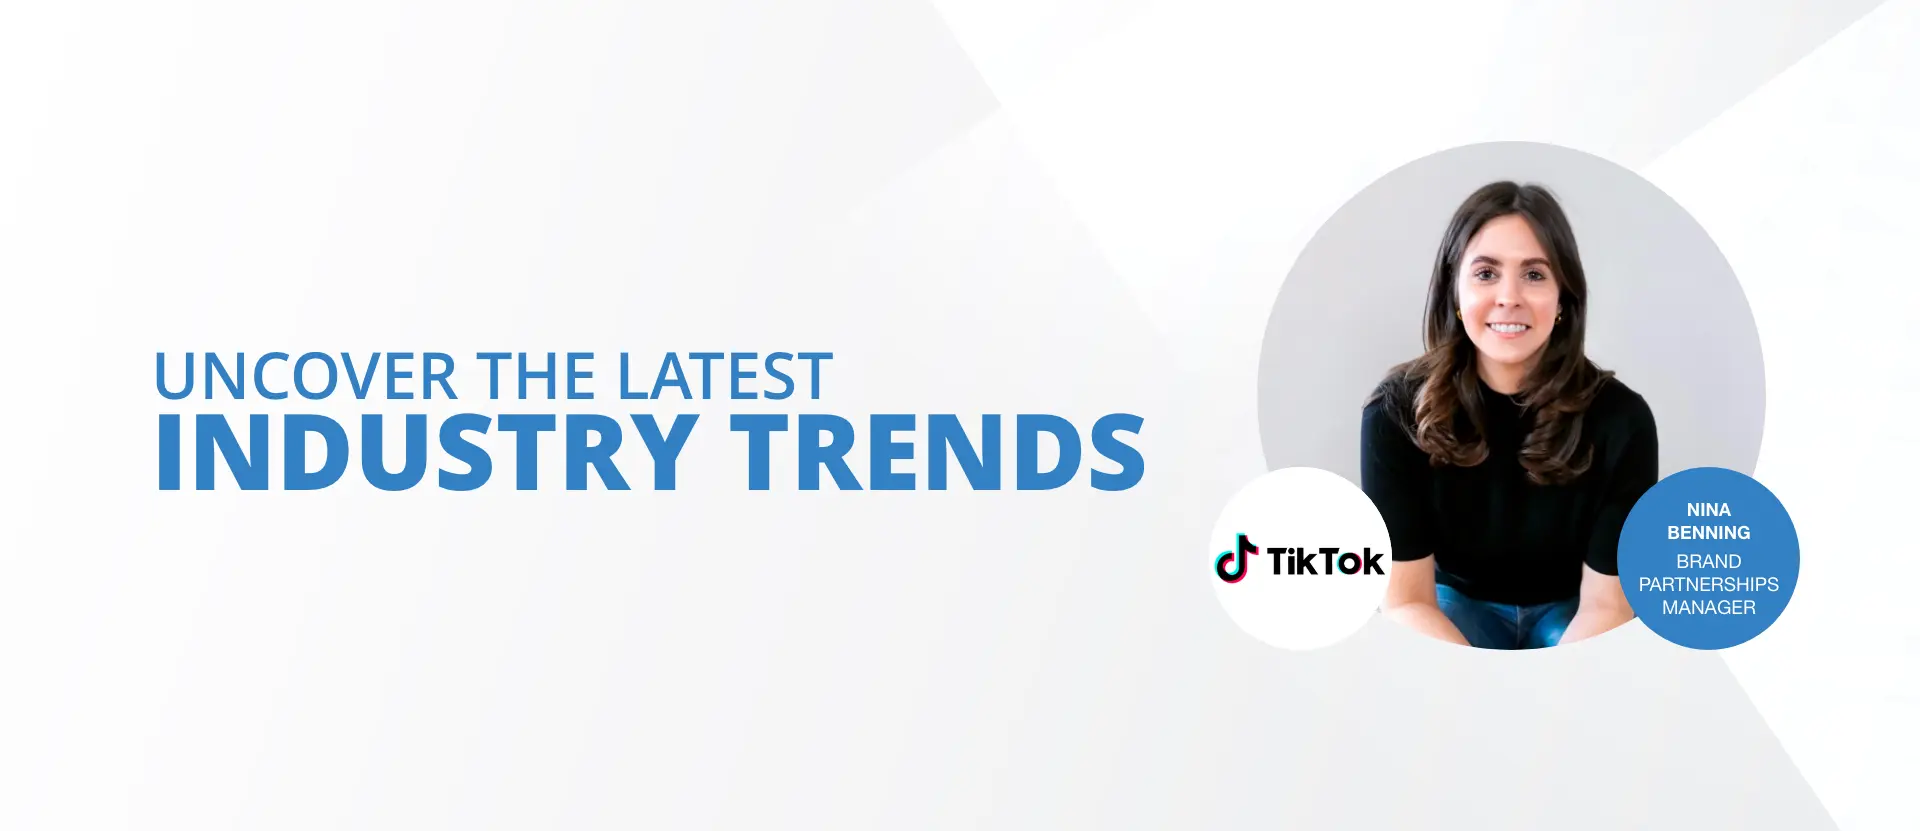 Uncover the latest industry trends